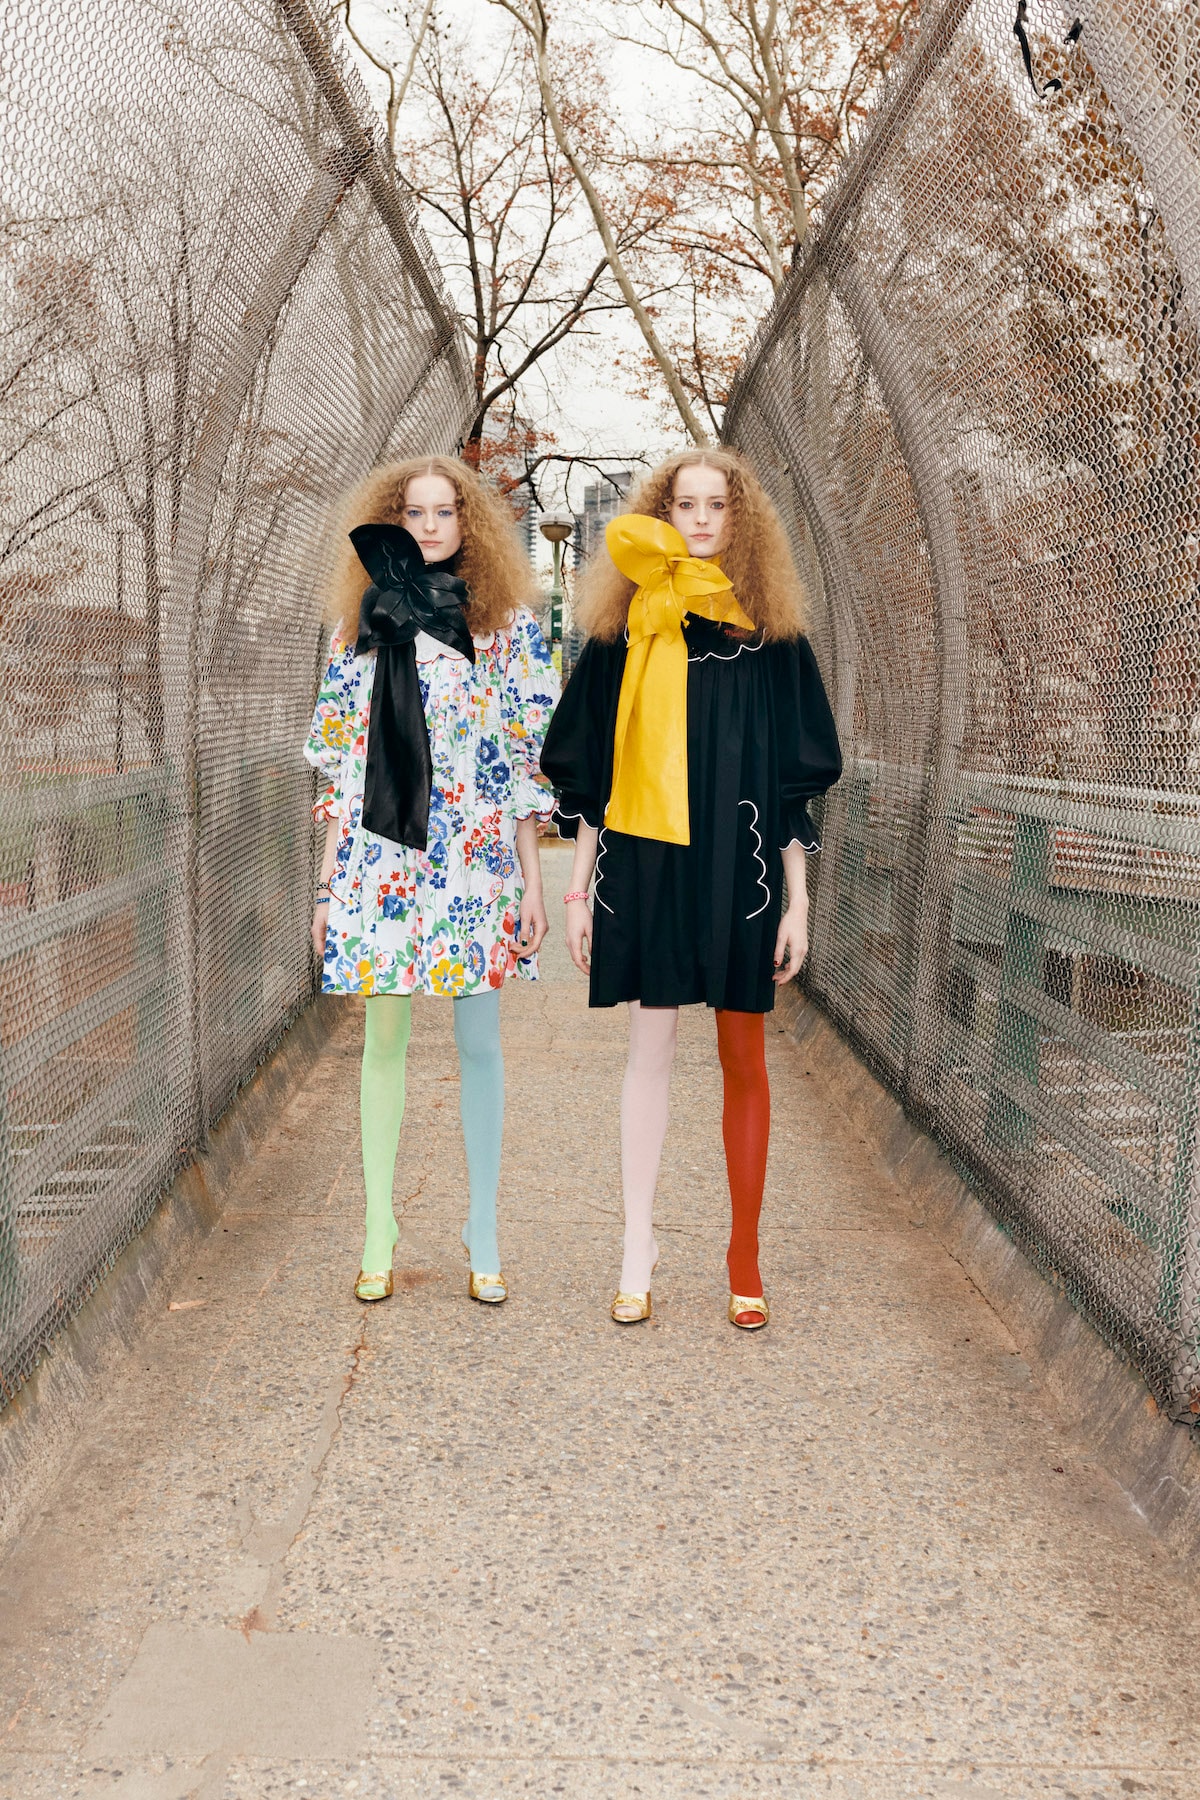 The Marc Jacobs Campaign Lookbook Release New Label Marc Jacobs Brand RTW Ready To Wear Range Accessories Apparel 